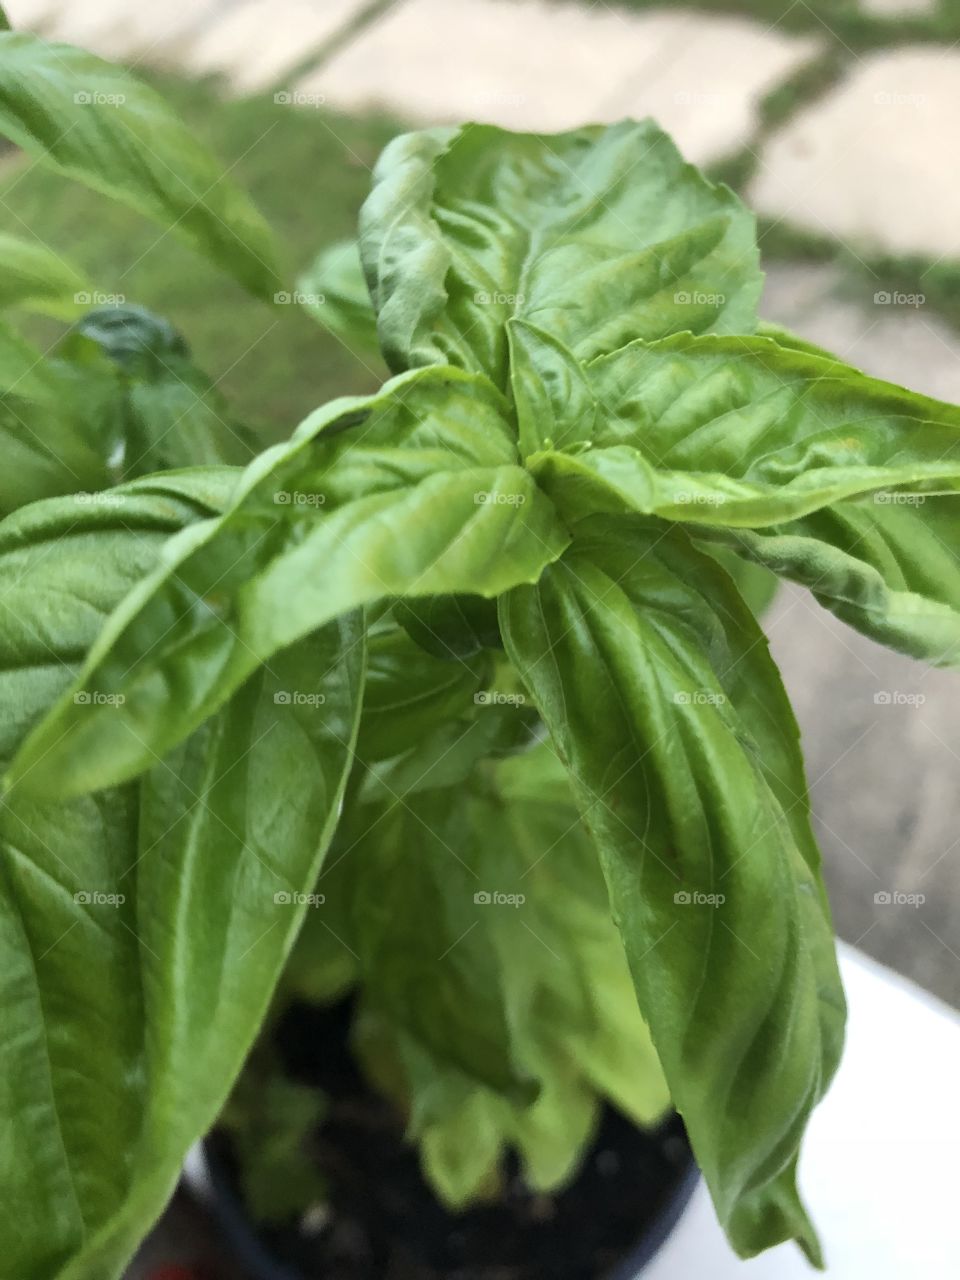 Basil leafs from a plant